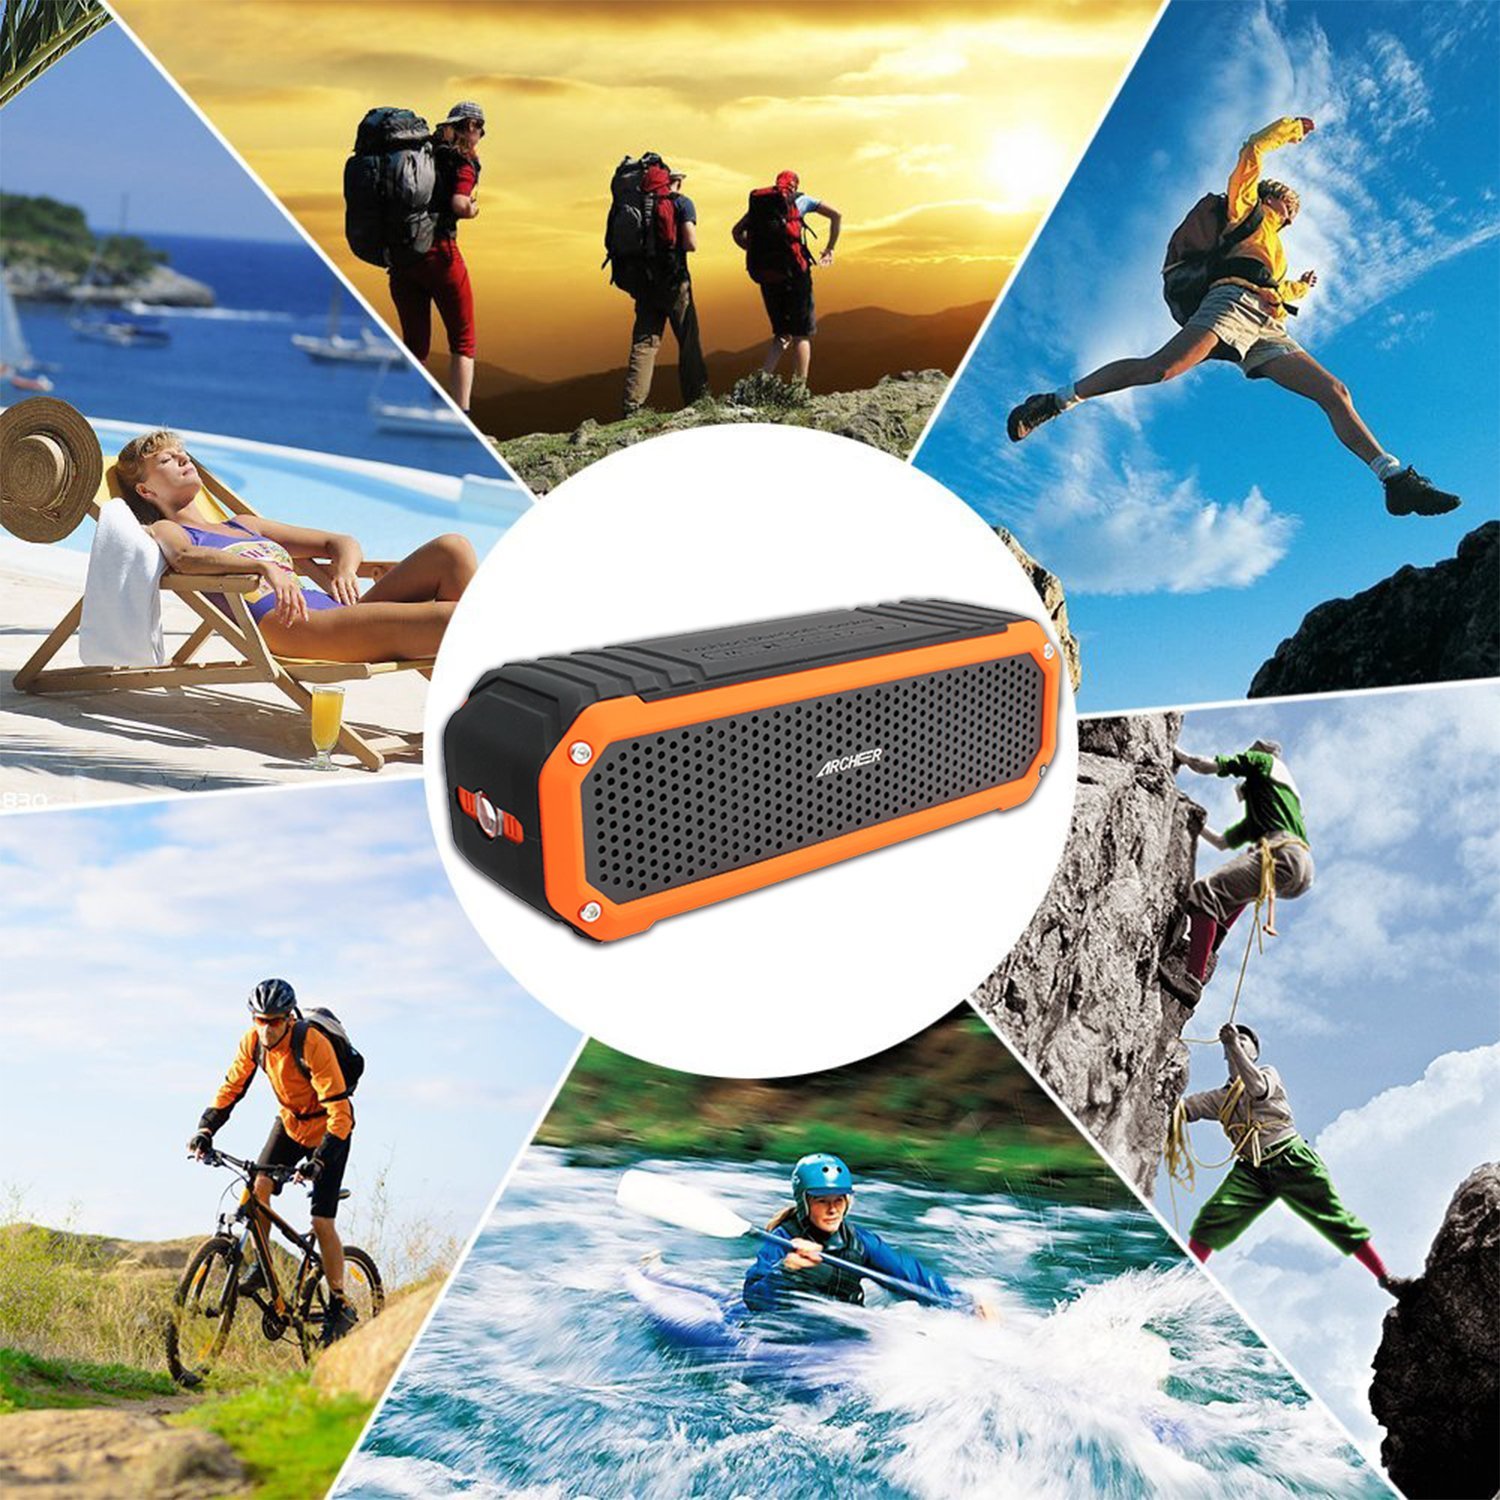 Archeer Portable Outdoor Bluetooth Speakers with Bass, Flashlight, 12 Hour Playtime 10W Drivers, A226 Black&Orange